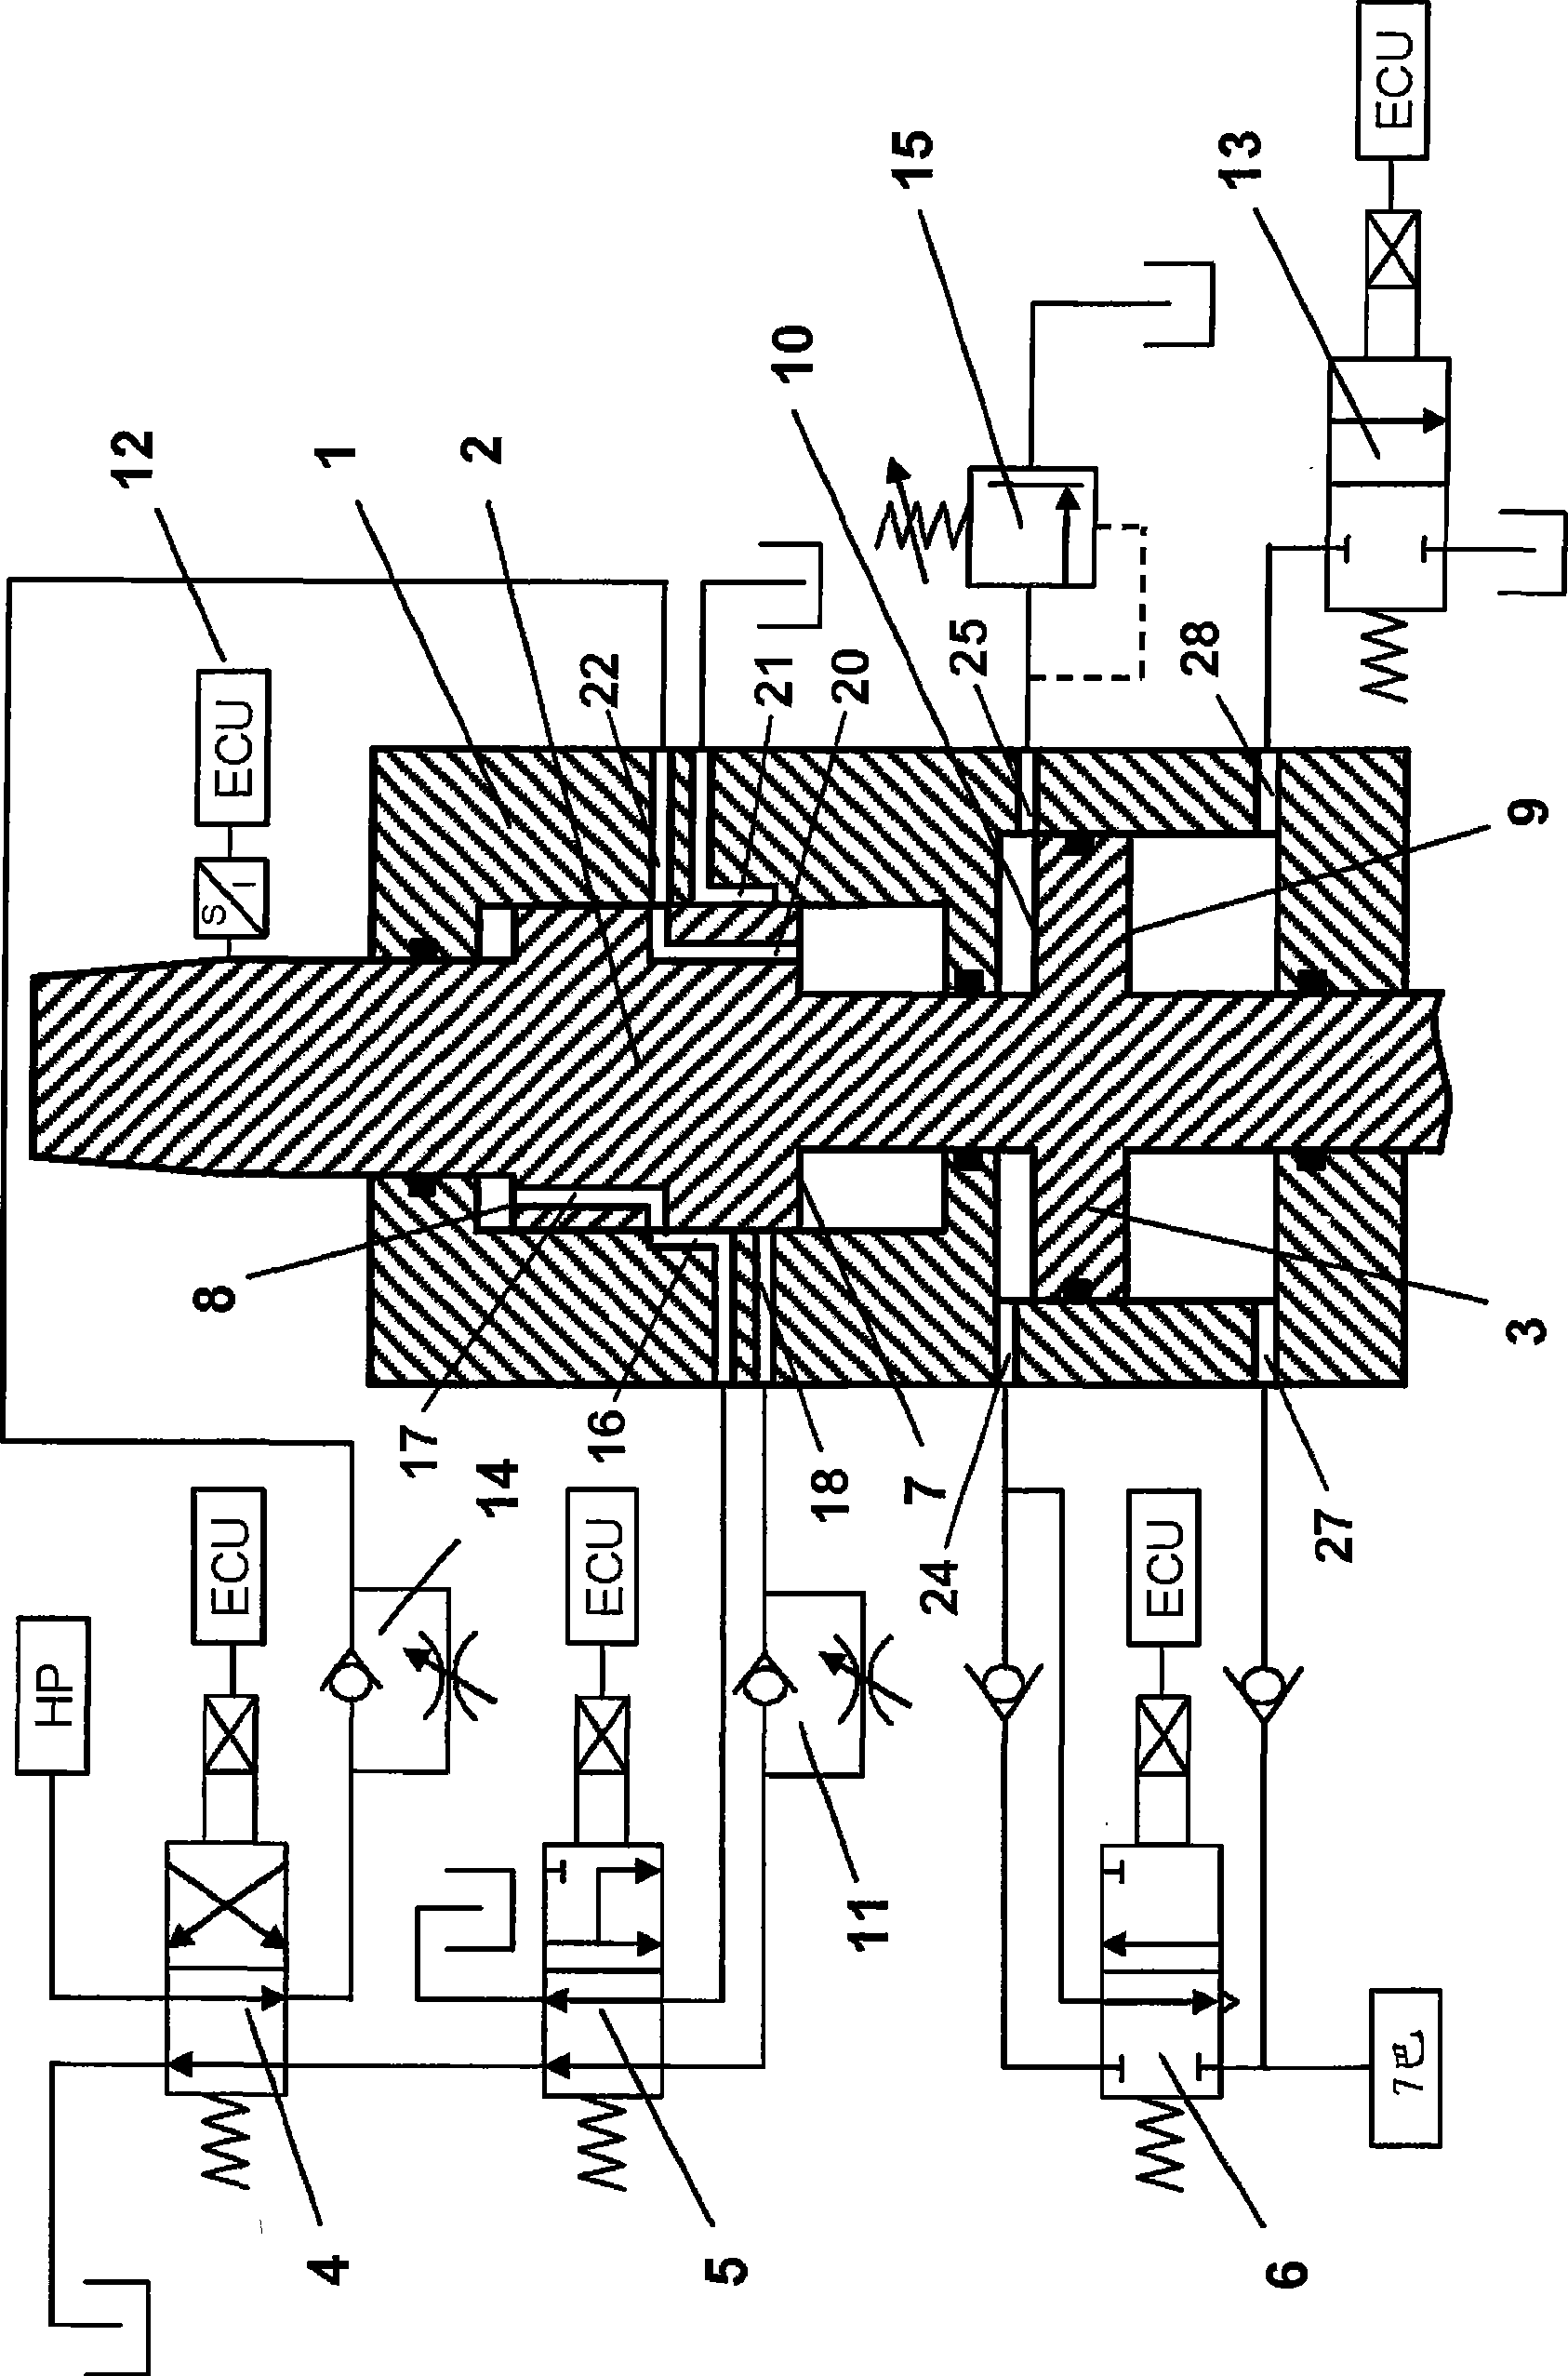 Exhaust valve actuator for large-scale two-stroke diesel engine